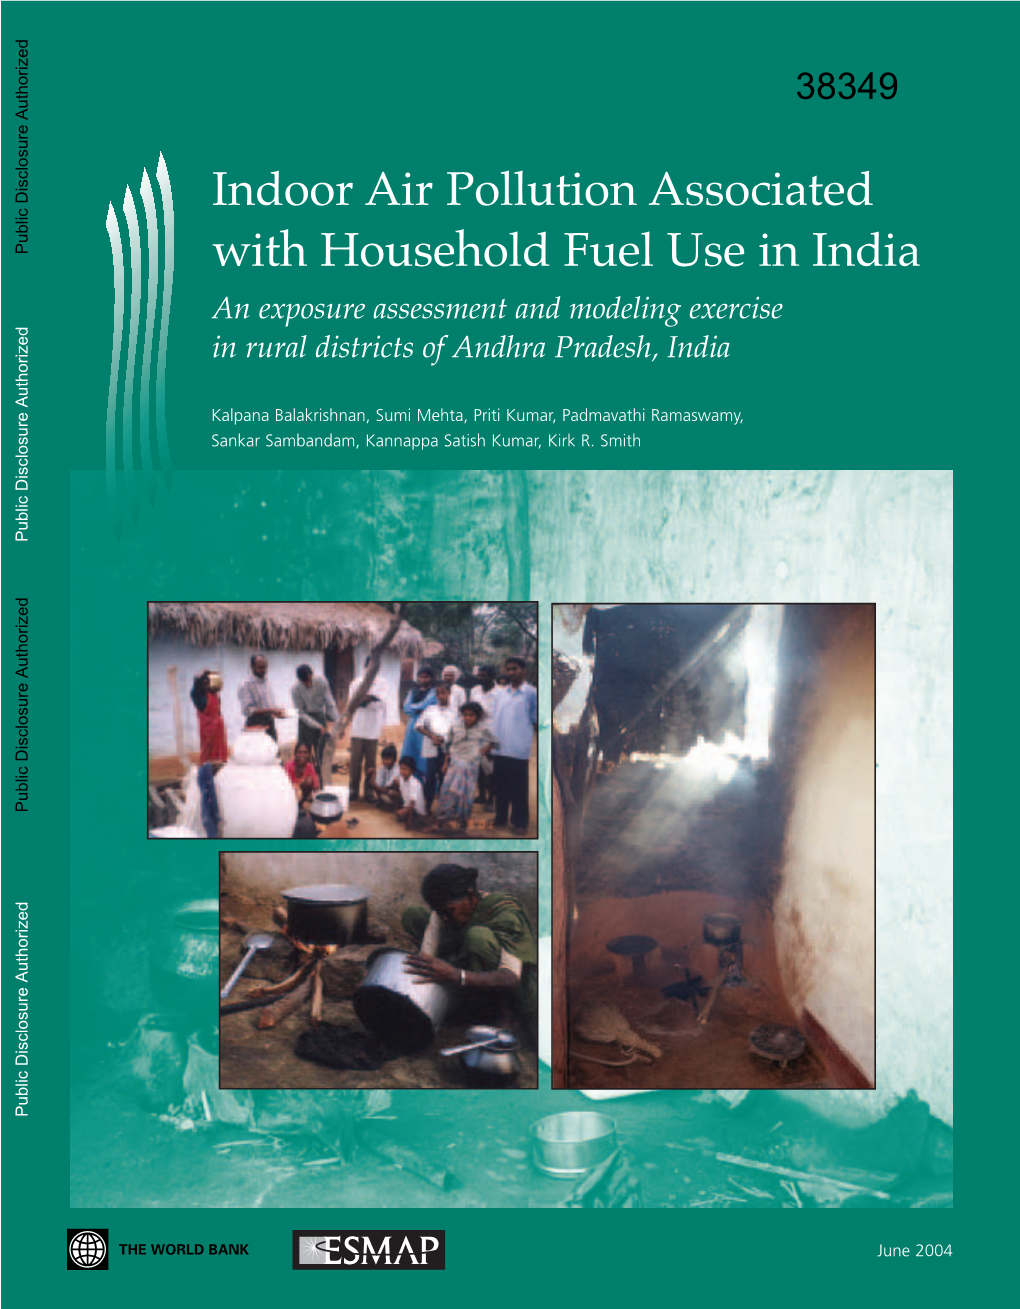 Indoor Air Pollution Associated with Household Fuel Use in India